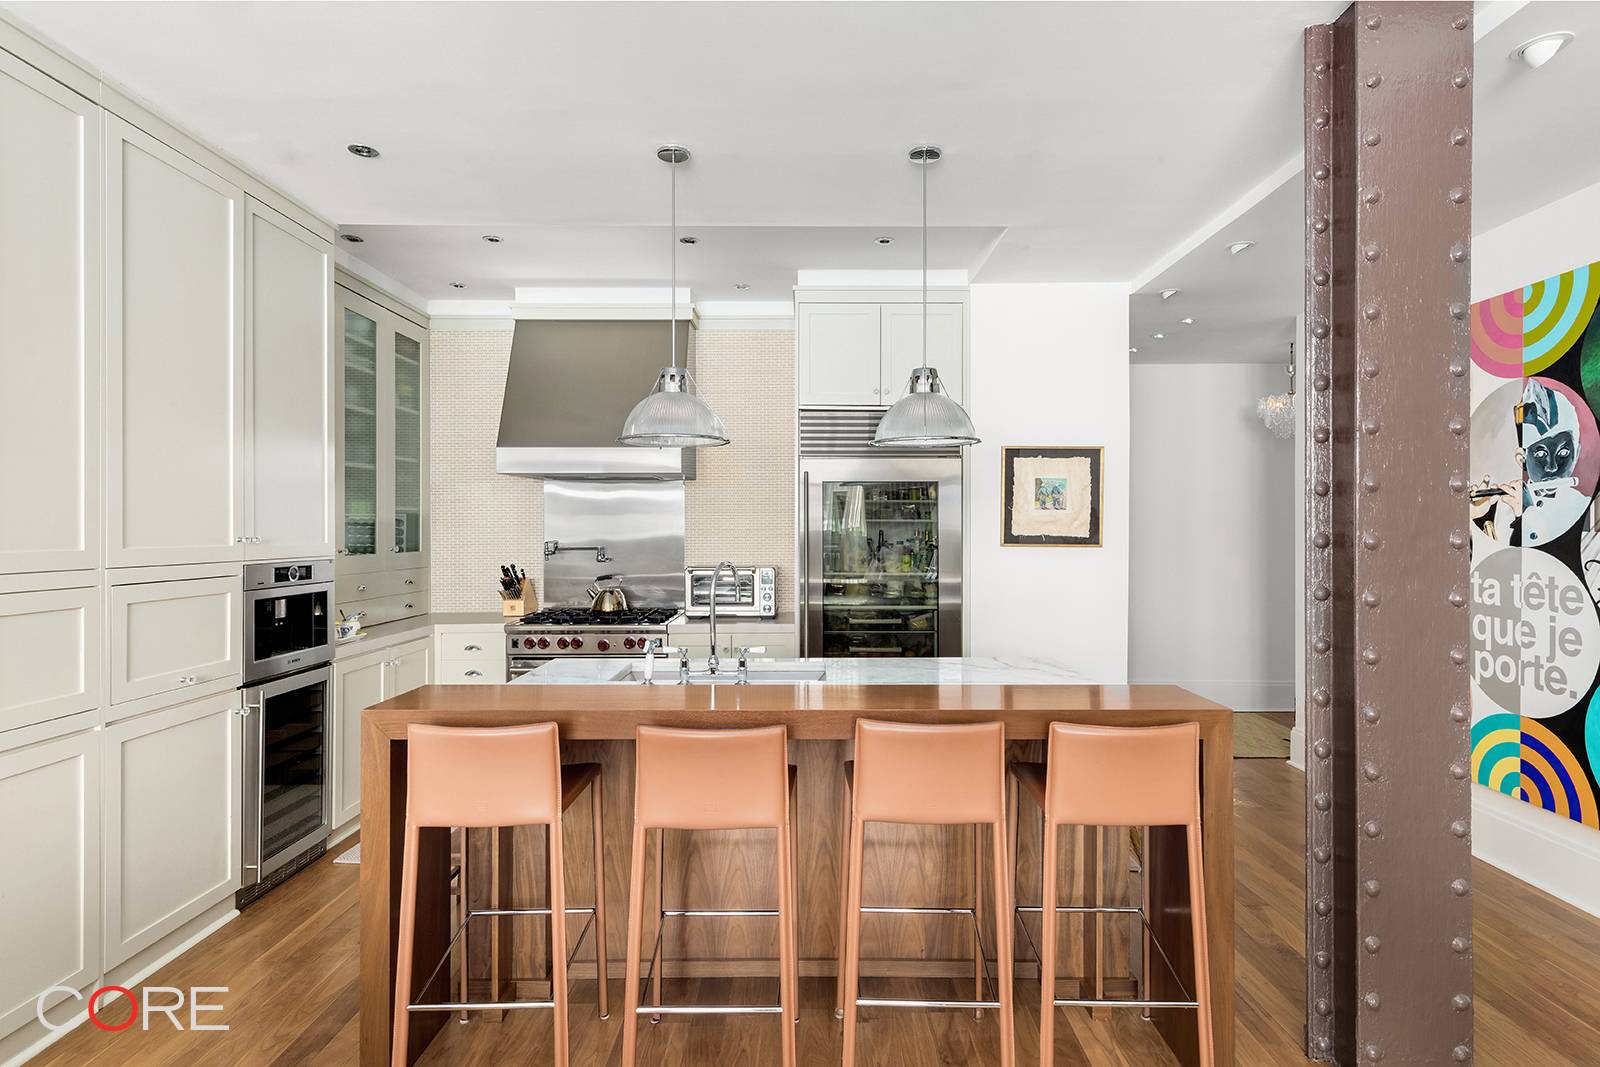 Welcome to Residence 11D at 141 Fifth Avenue, a beautifully designed and carefully crafted two bedroom, two and a half bathroom loft that seamlessly blends prewar grandeur with modern, top ...